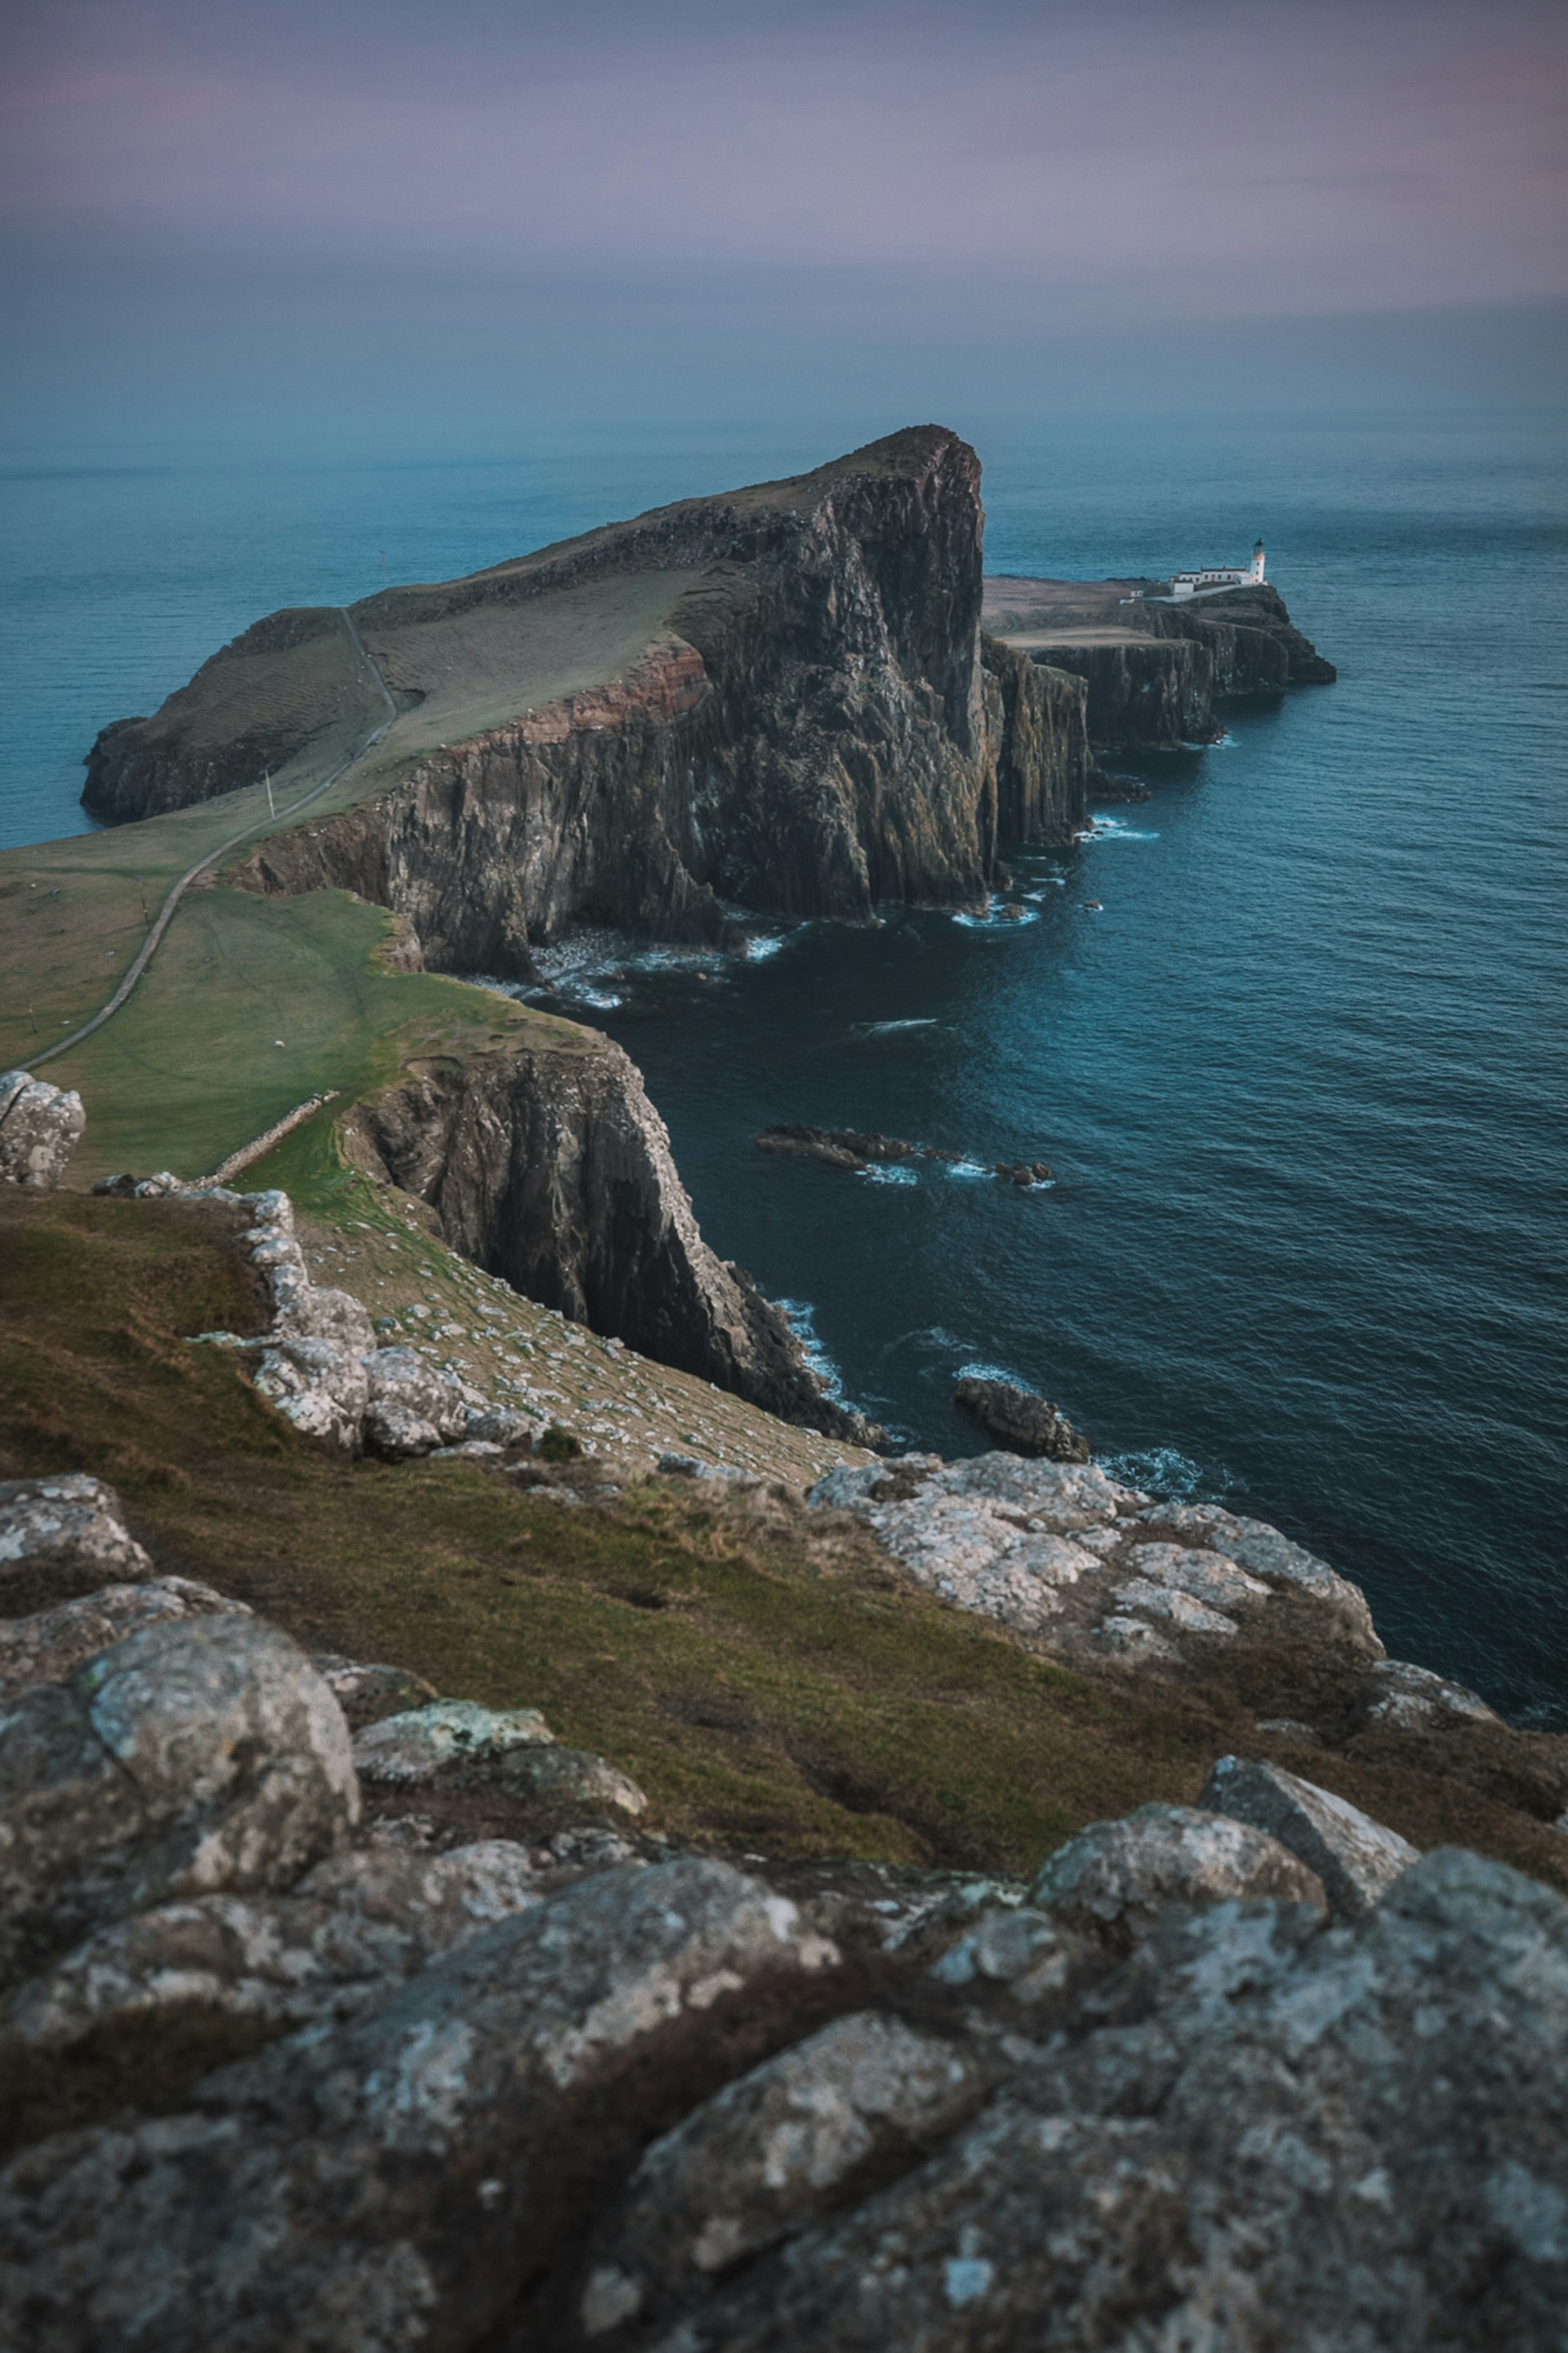 Looking out to Neist Point Lighthouse on the Isle of Skye, Scotland in the evening; it sits at the end of a long promontory of high rocky cliffs topped by grass.